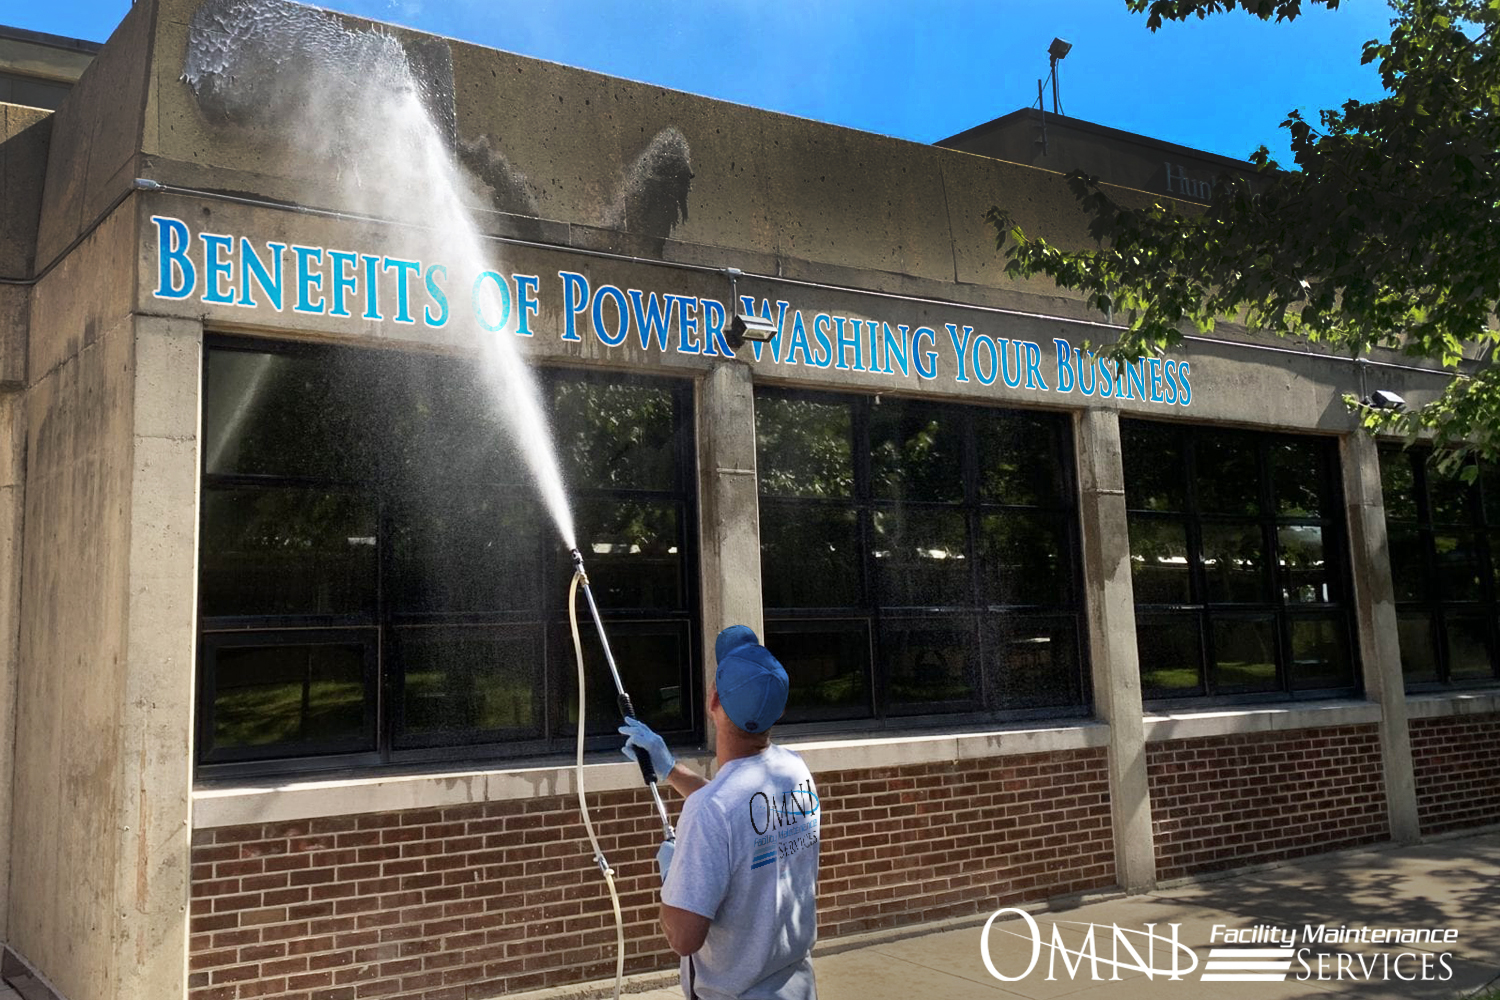 power washing your business